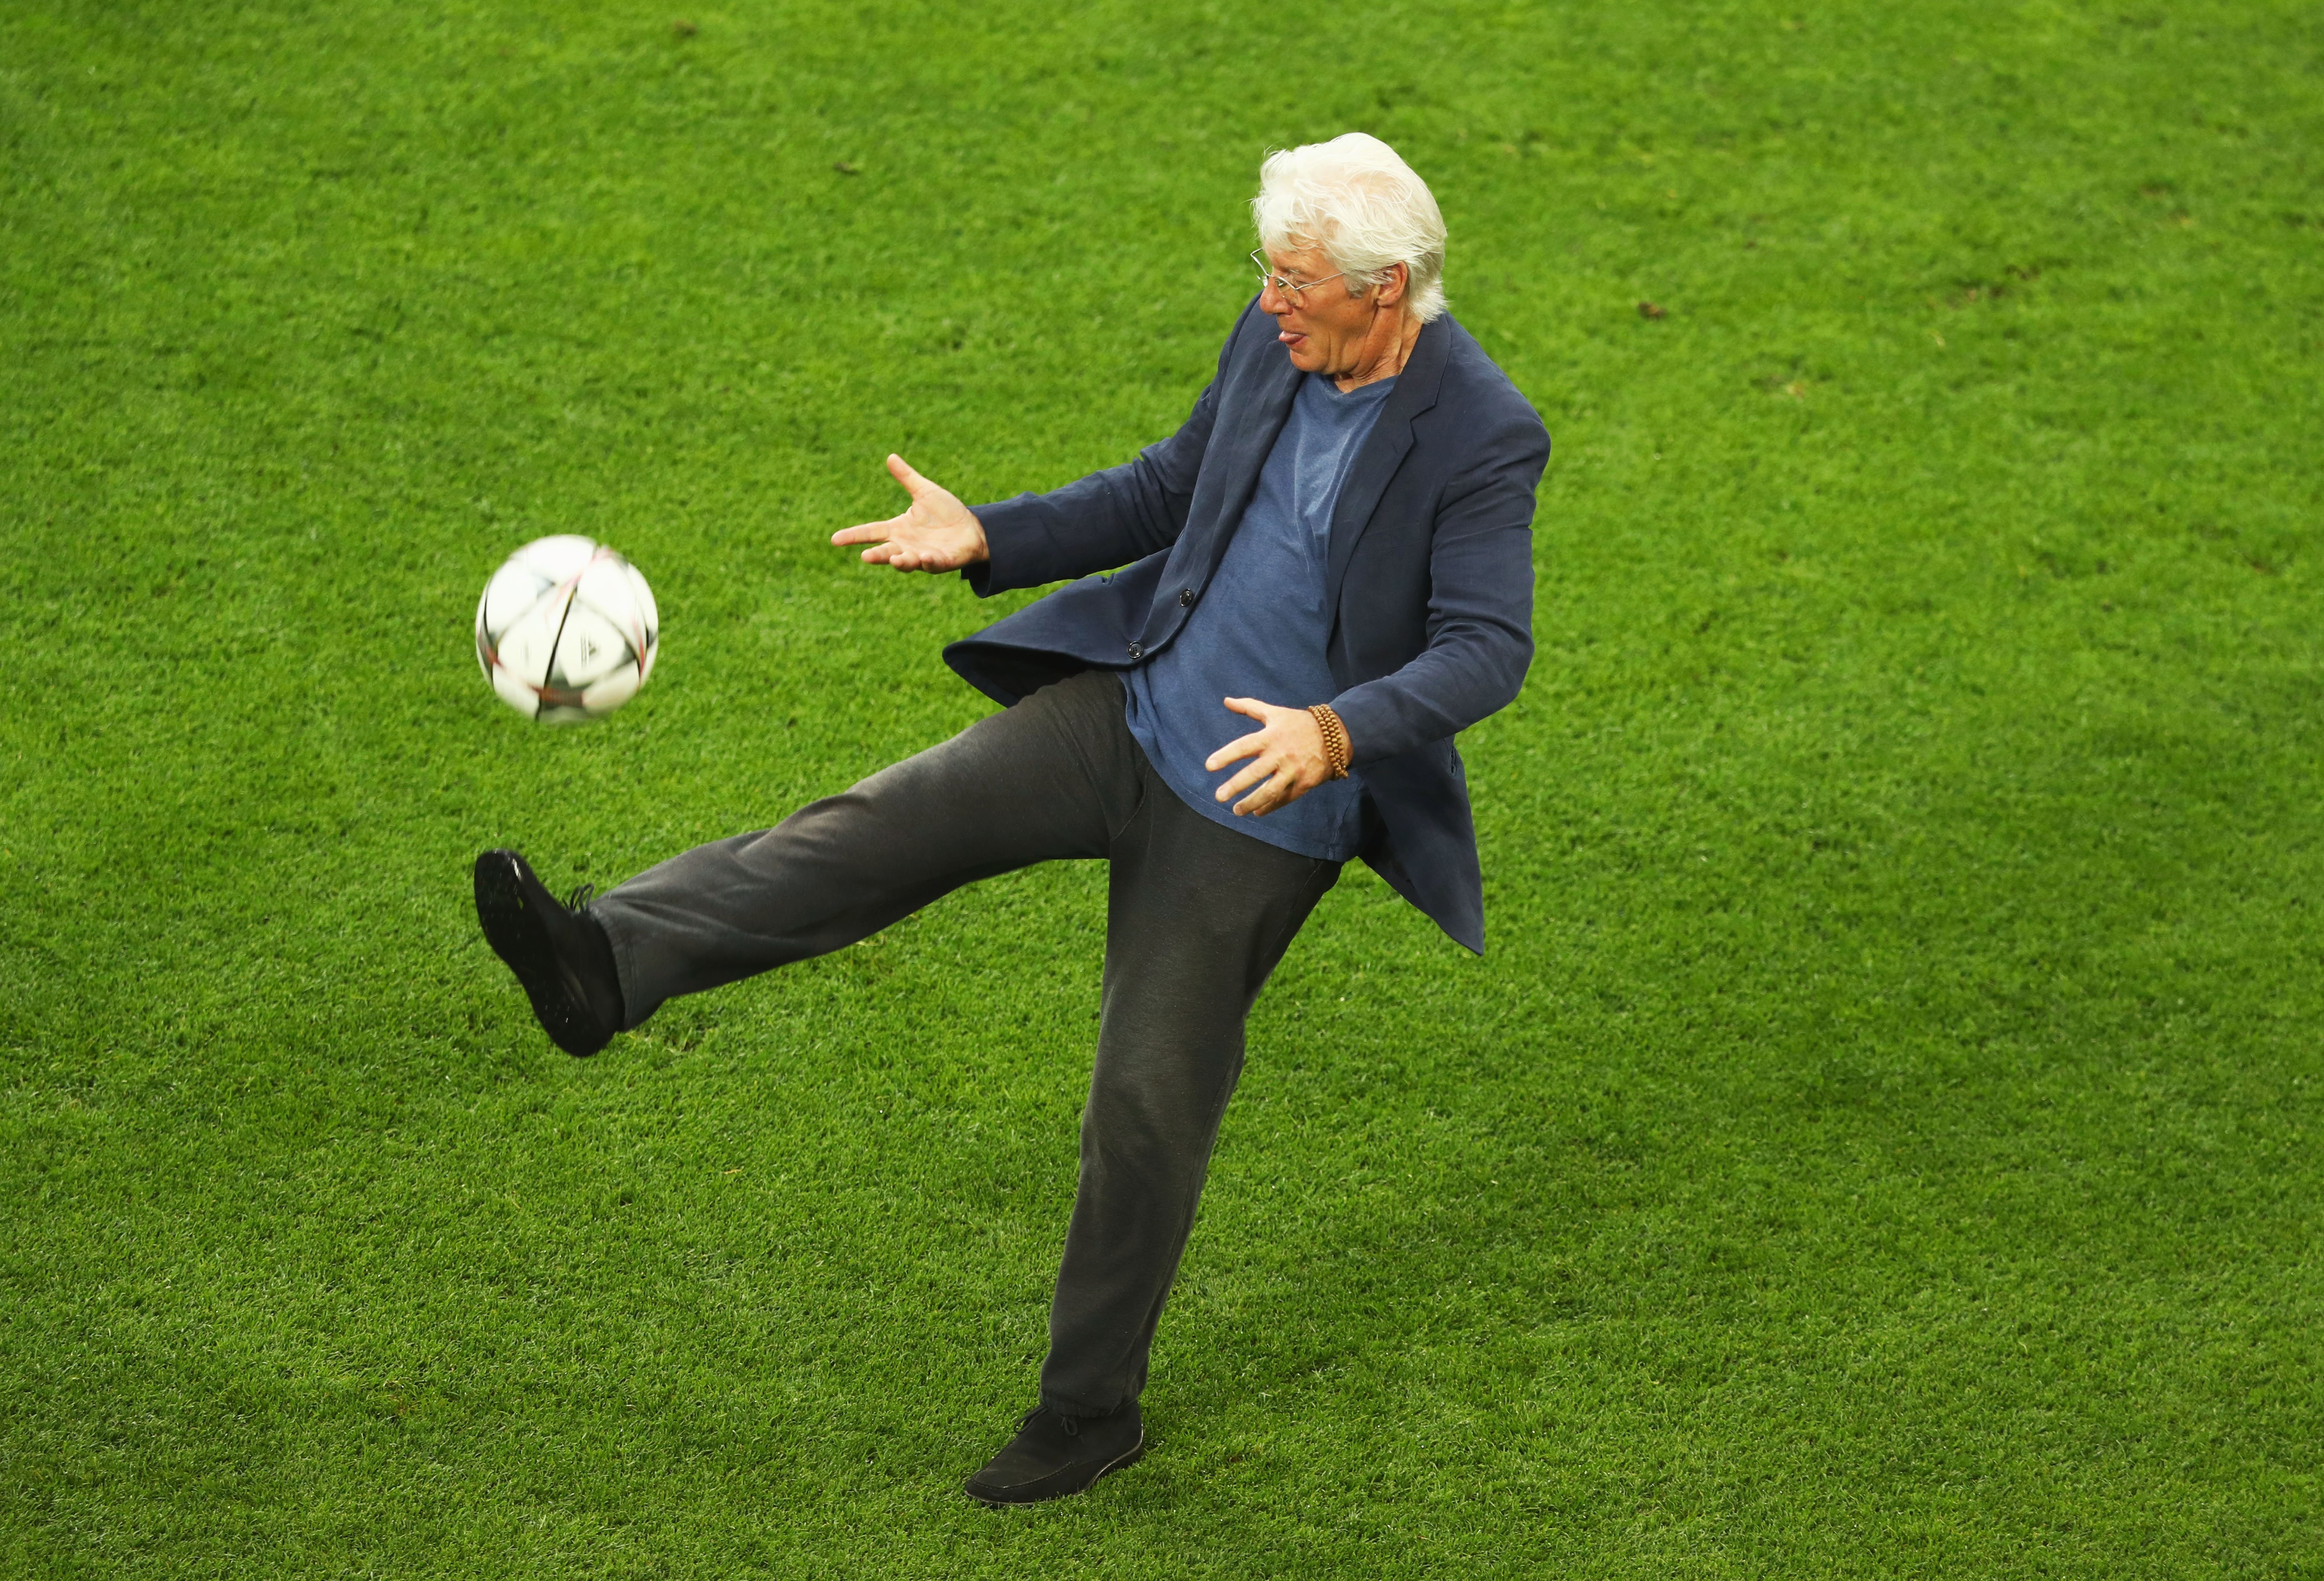 Richard Gere kicks the ball on the San Siro pitch after a Real Madrid training session on the eve of the UEFA Champions League Final against Atletico de Madrid at Stadio Giuseppe Meazza on May 27, 2016 in Milan, Italy | Source: Getty Images 